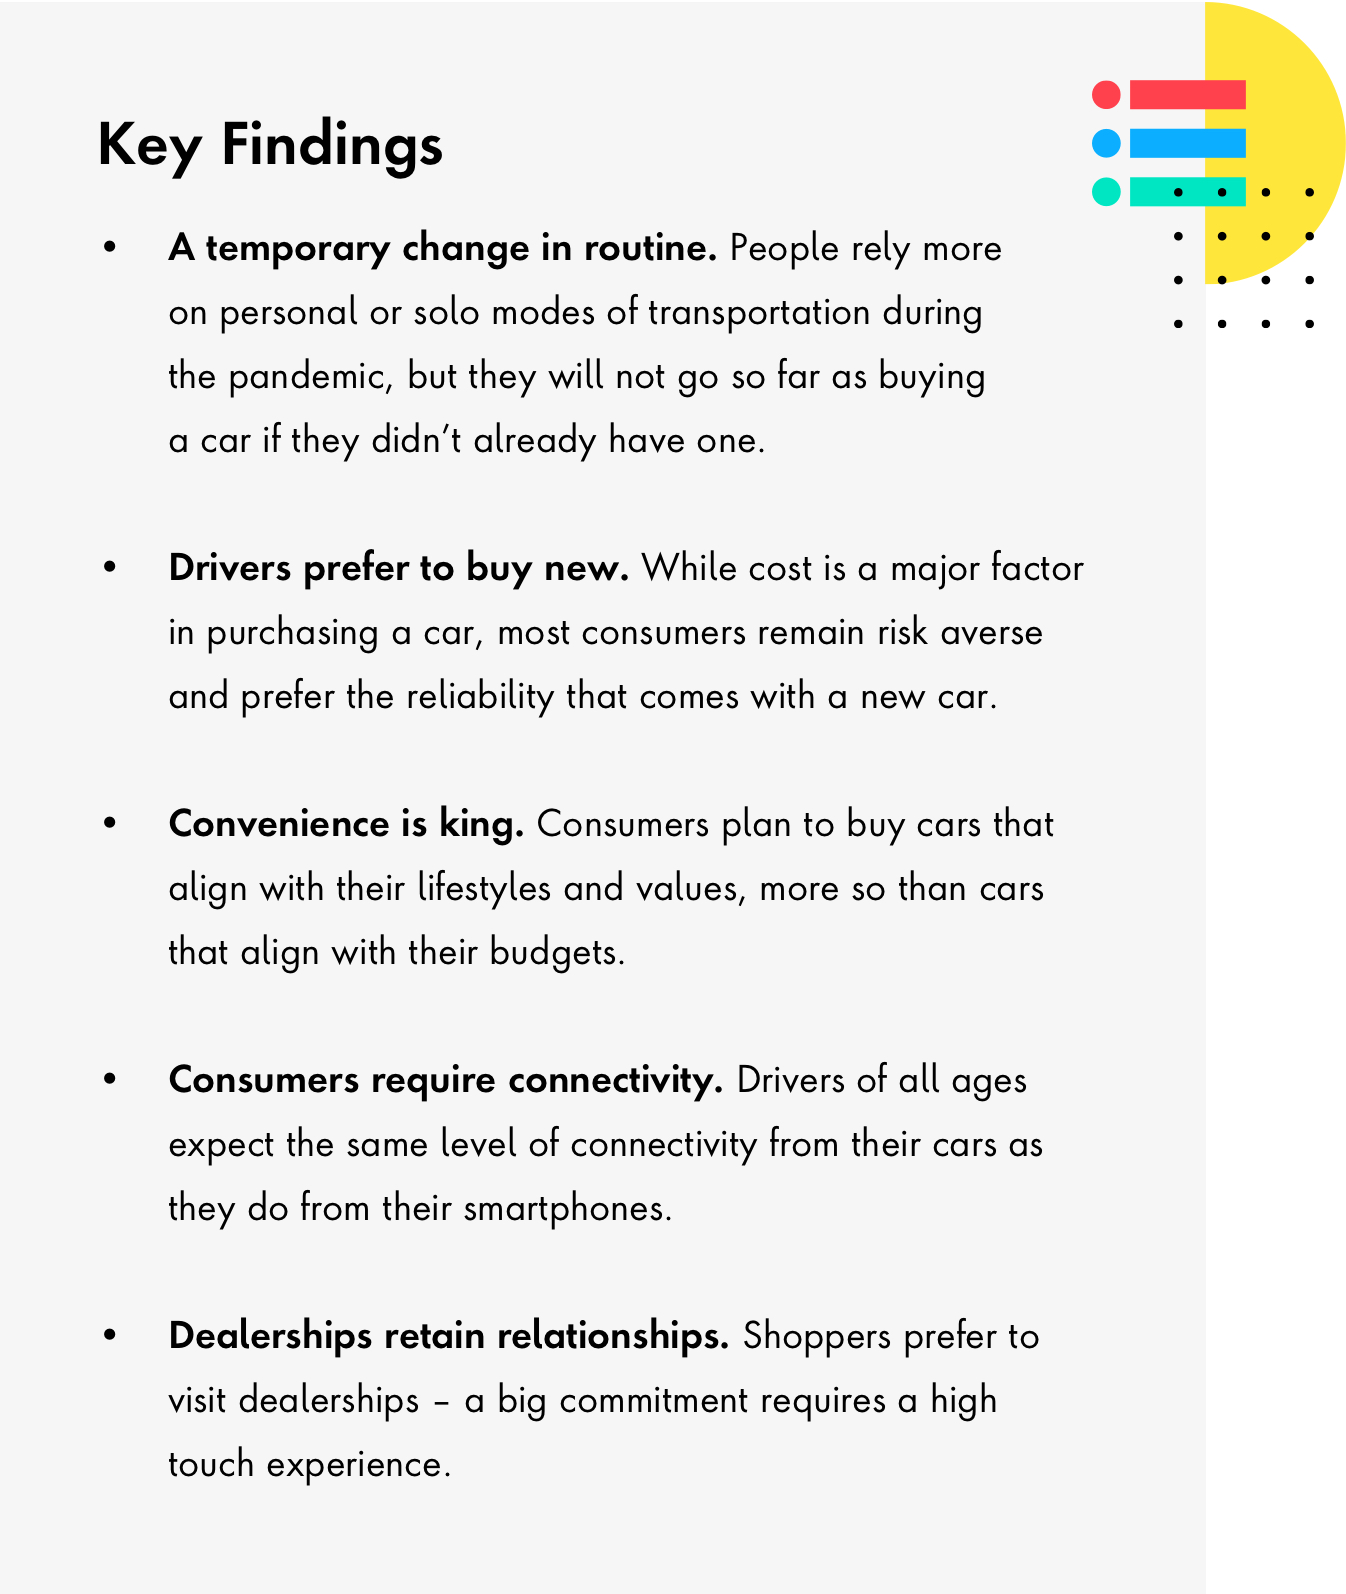 Five key findings in transportation, which say people rely more on personal or solo means of transportation, but not enough to buy a car if they didn't have one. Drivers prefer to buy new, despite the cost factor. Consumers plan to buy cars that check their features, not budget boxes. Consumers expect the same connectivity in their cars as they do from their smartphones, and shoppers still prefer to visit dealerships—a big commitment requires a high touch experience.